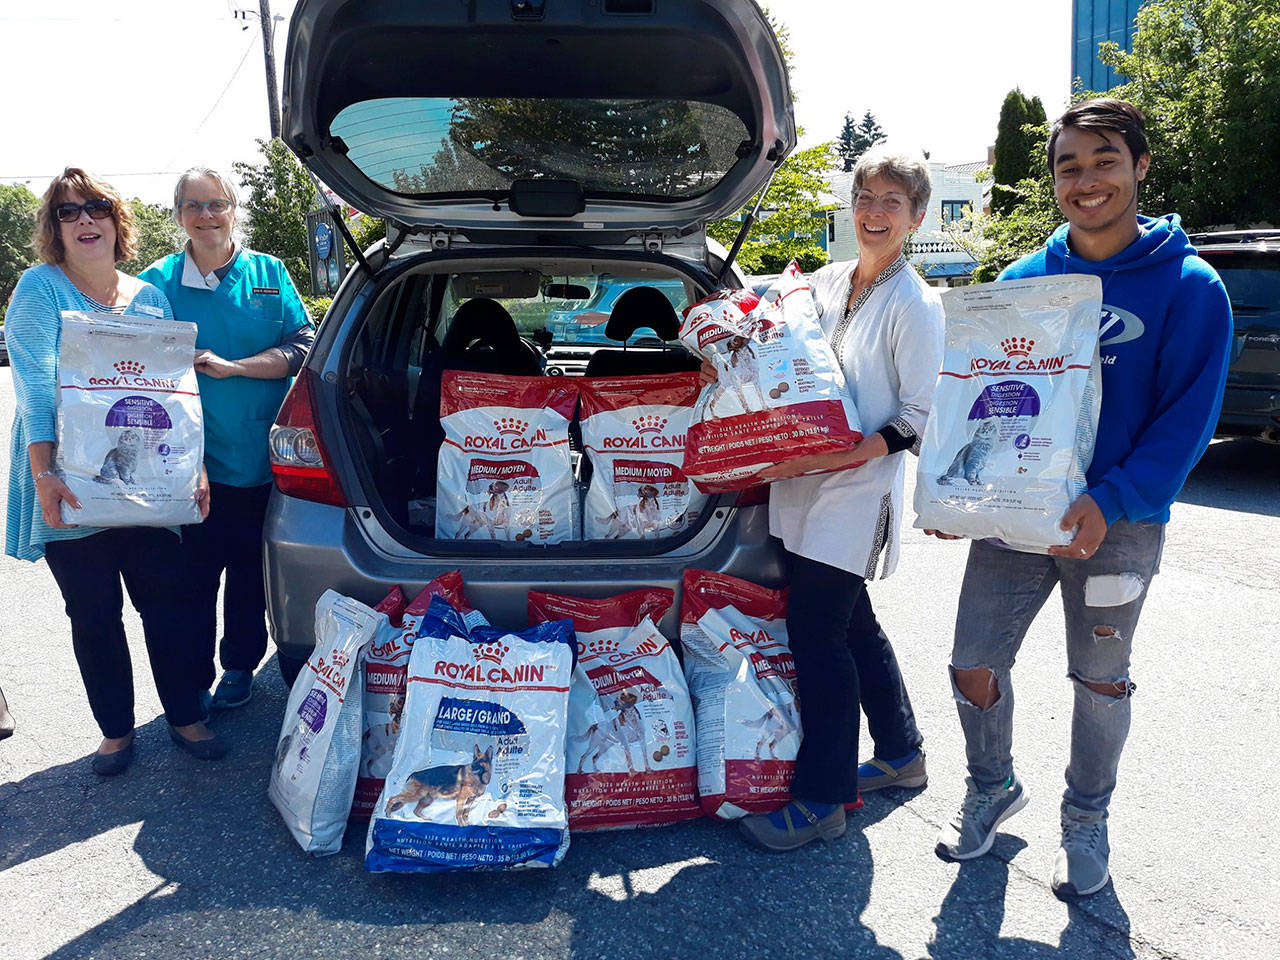 Good Cheer accepts a large donation of food June 24 in downtown Langley outside the Animal Hospital. From left to right: Good Cheer board member Kelly Turner-Gibson, Animal Hospital by the Sea Dr. Jean Dieden, Executive Director of Good Cheer Carol Squire and Good Cheer summer intern Kyle Kaltenbach. (Photo provided)